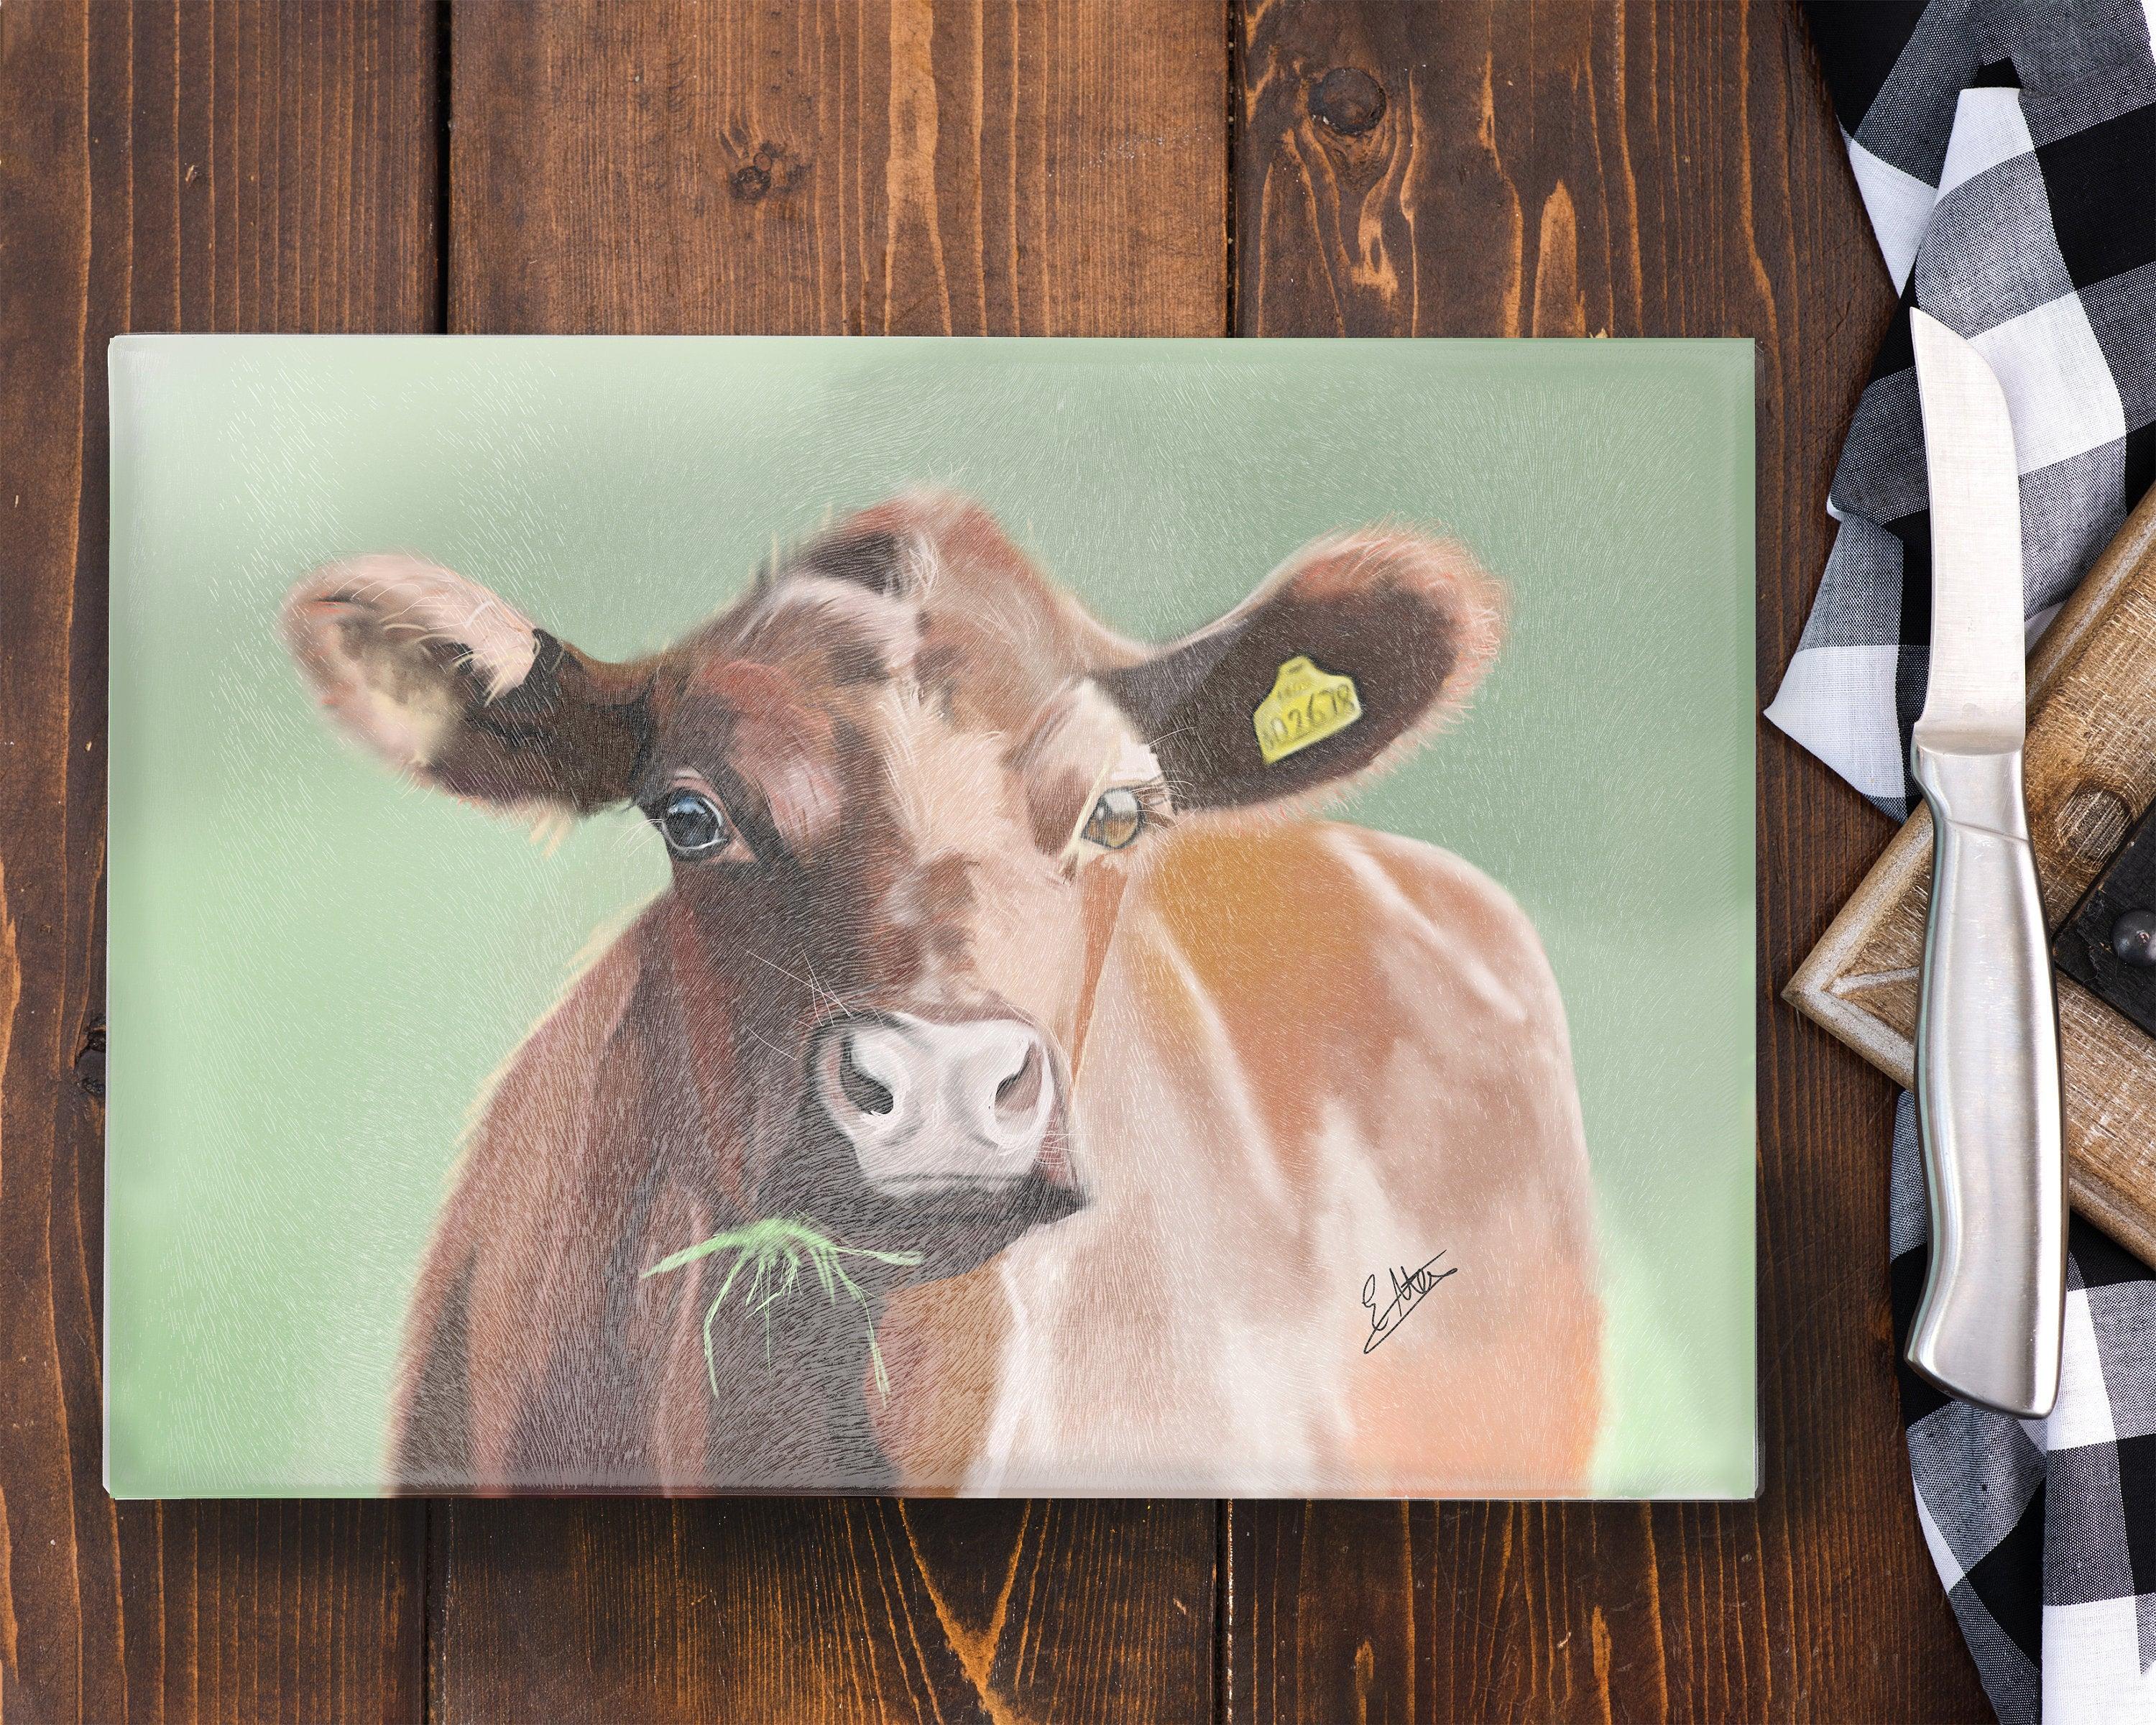 Dairy Cow Chopping board - Jersey cow -Farmhouse Kitchen Decor - glass work surface saver - Chopping board -Kitchen items